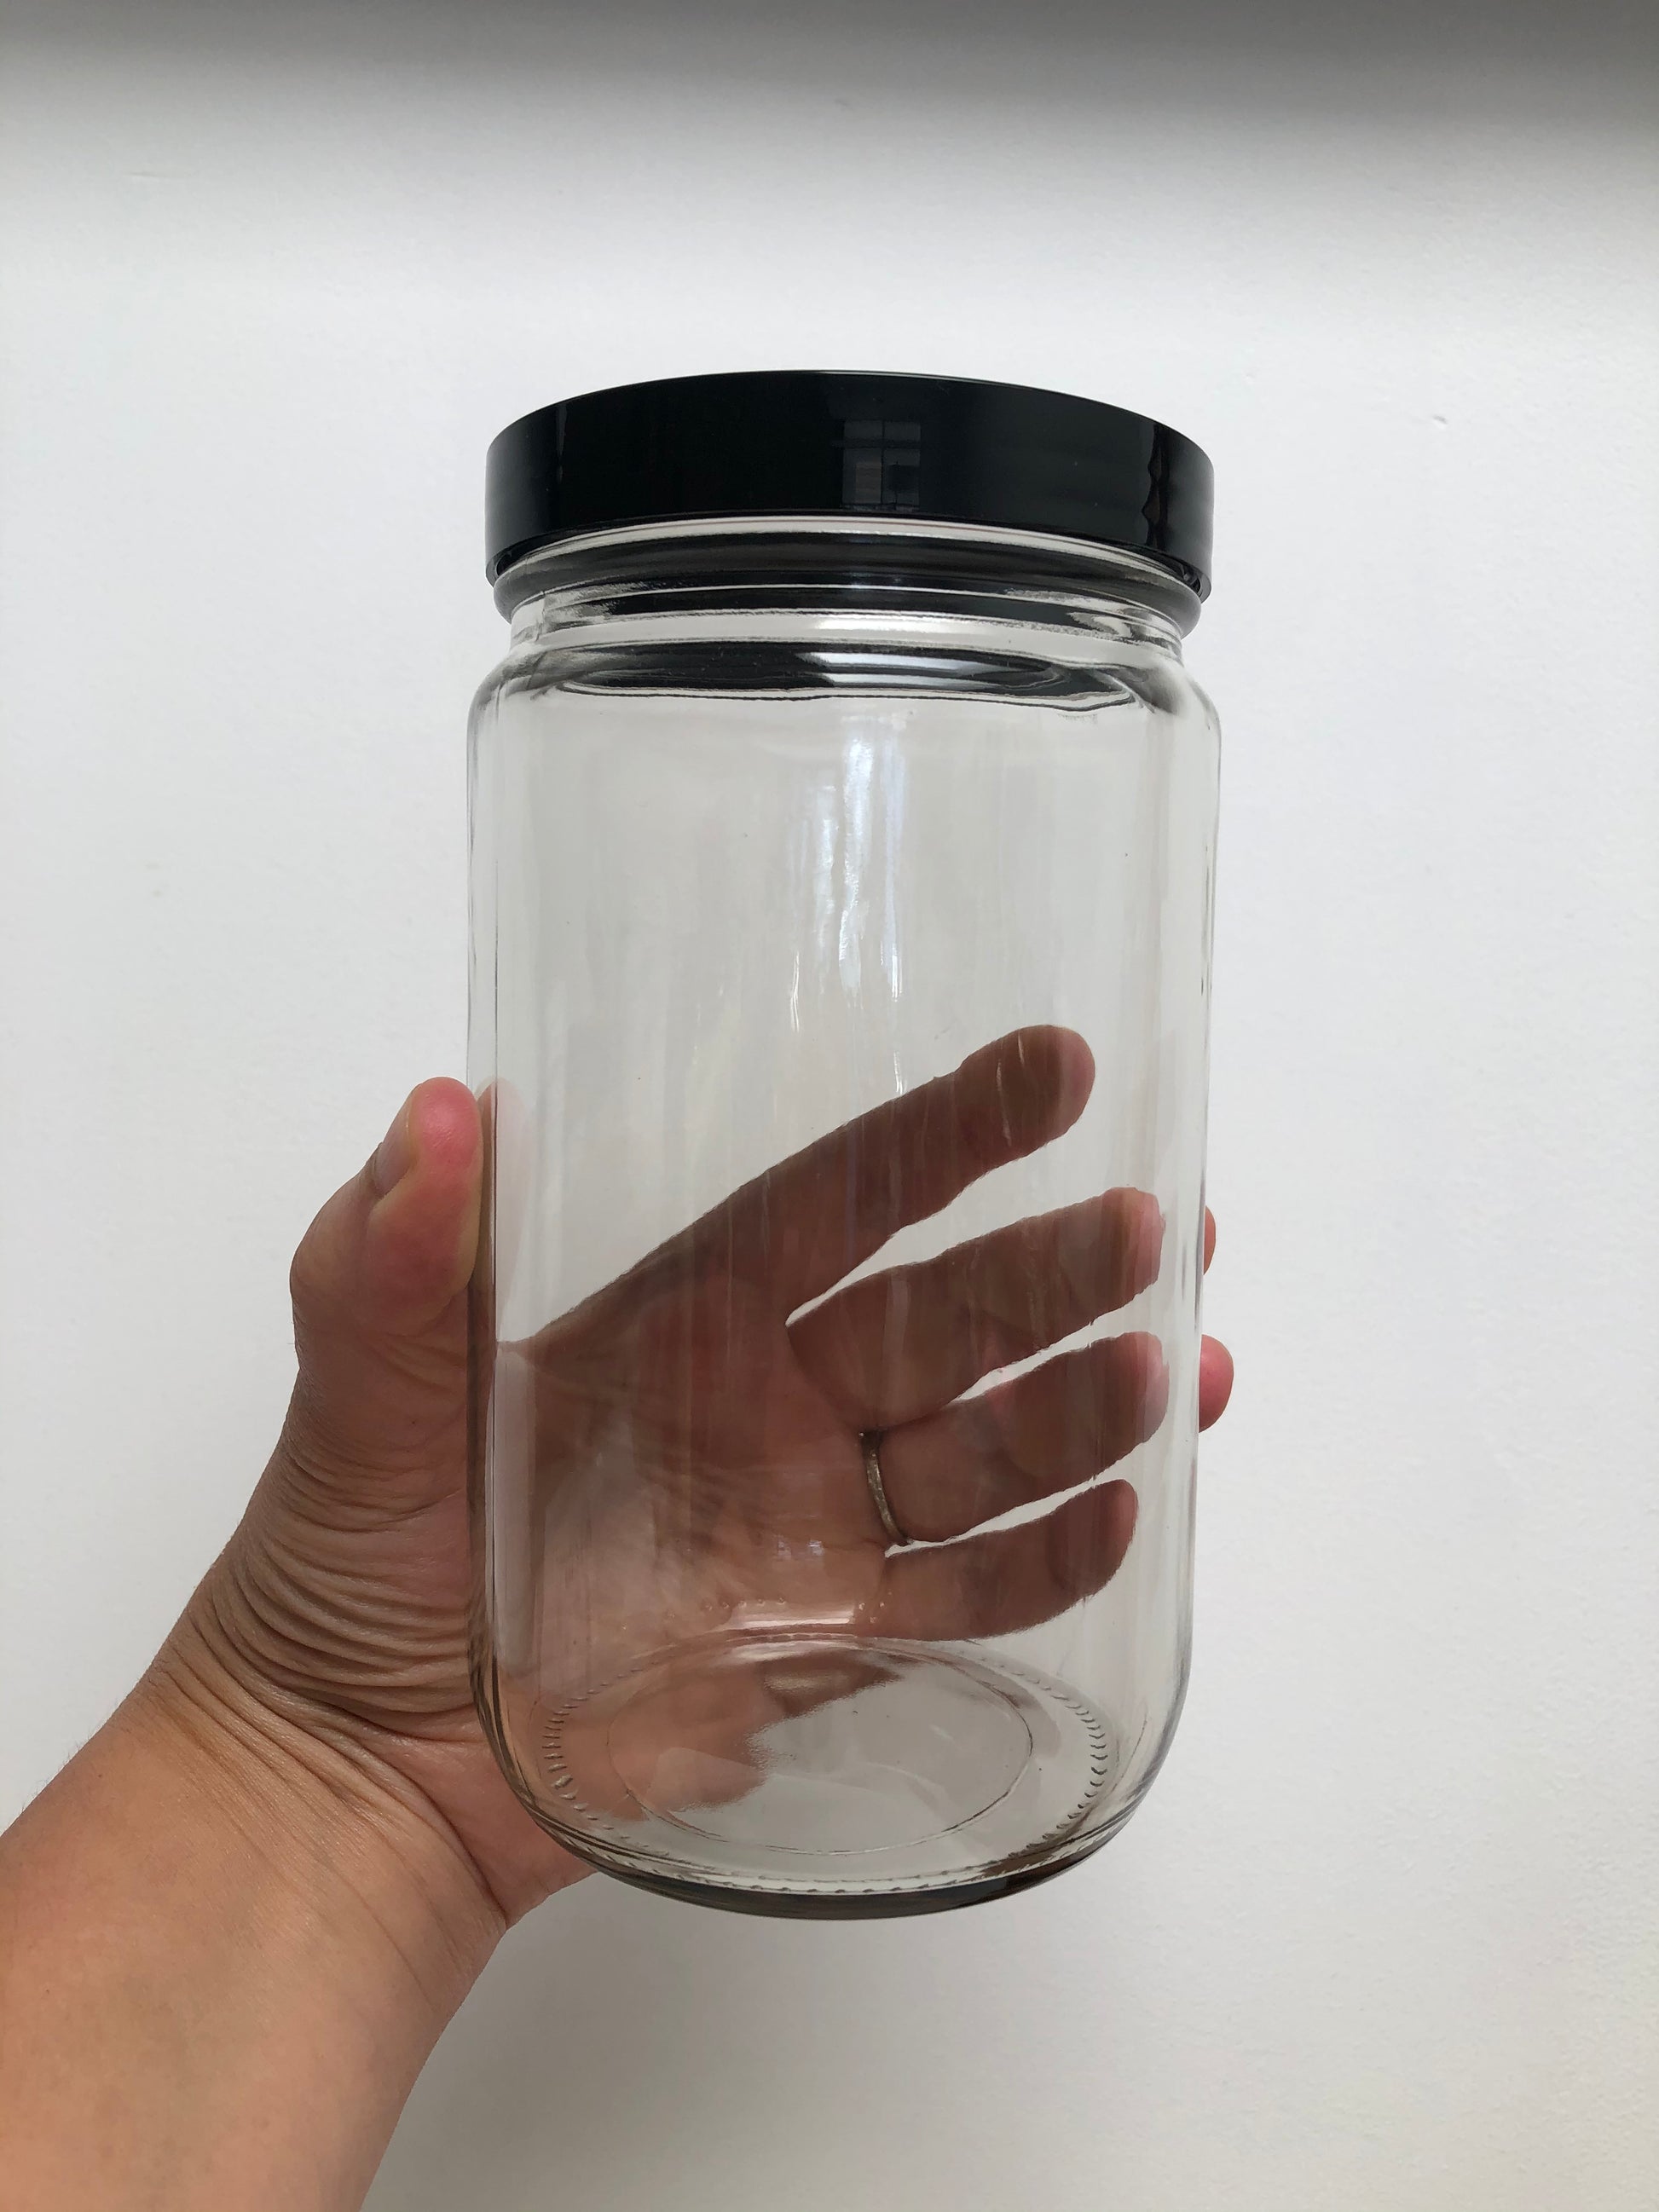 32 ounce clear glass jar with black plastic lid, shown as a container option